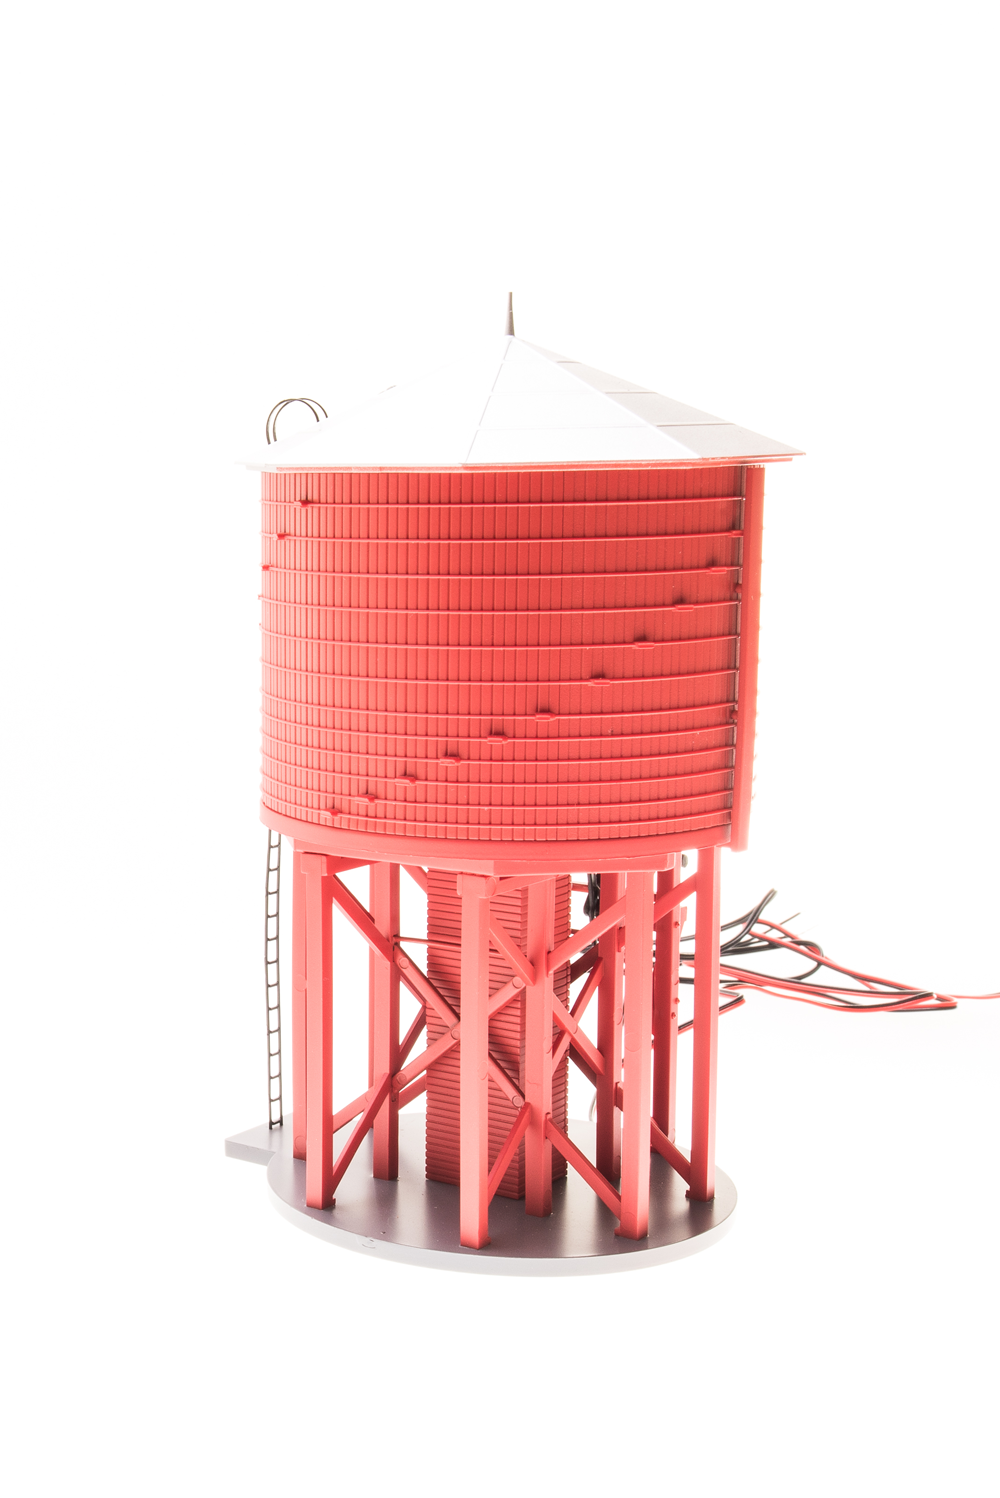 BLI-6090 Operating Water Tower w/ Sound, Unlettered, Boxcar Red, Non-weathered, HO